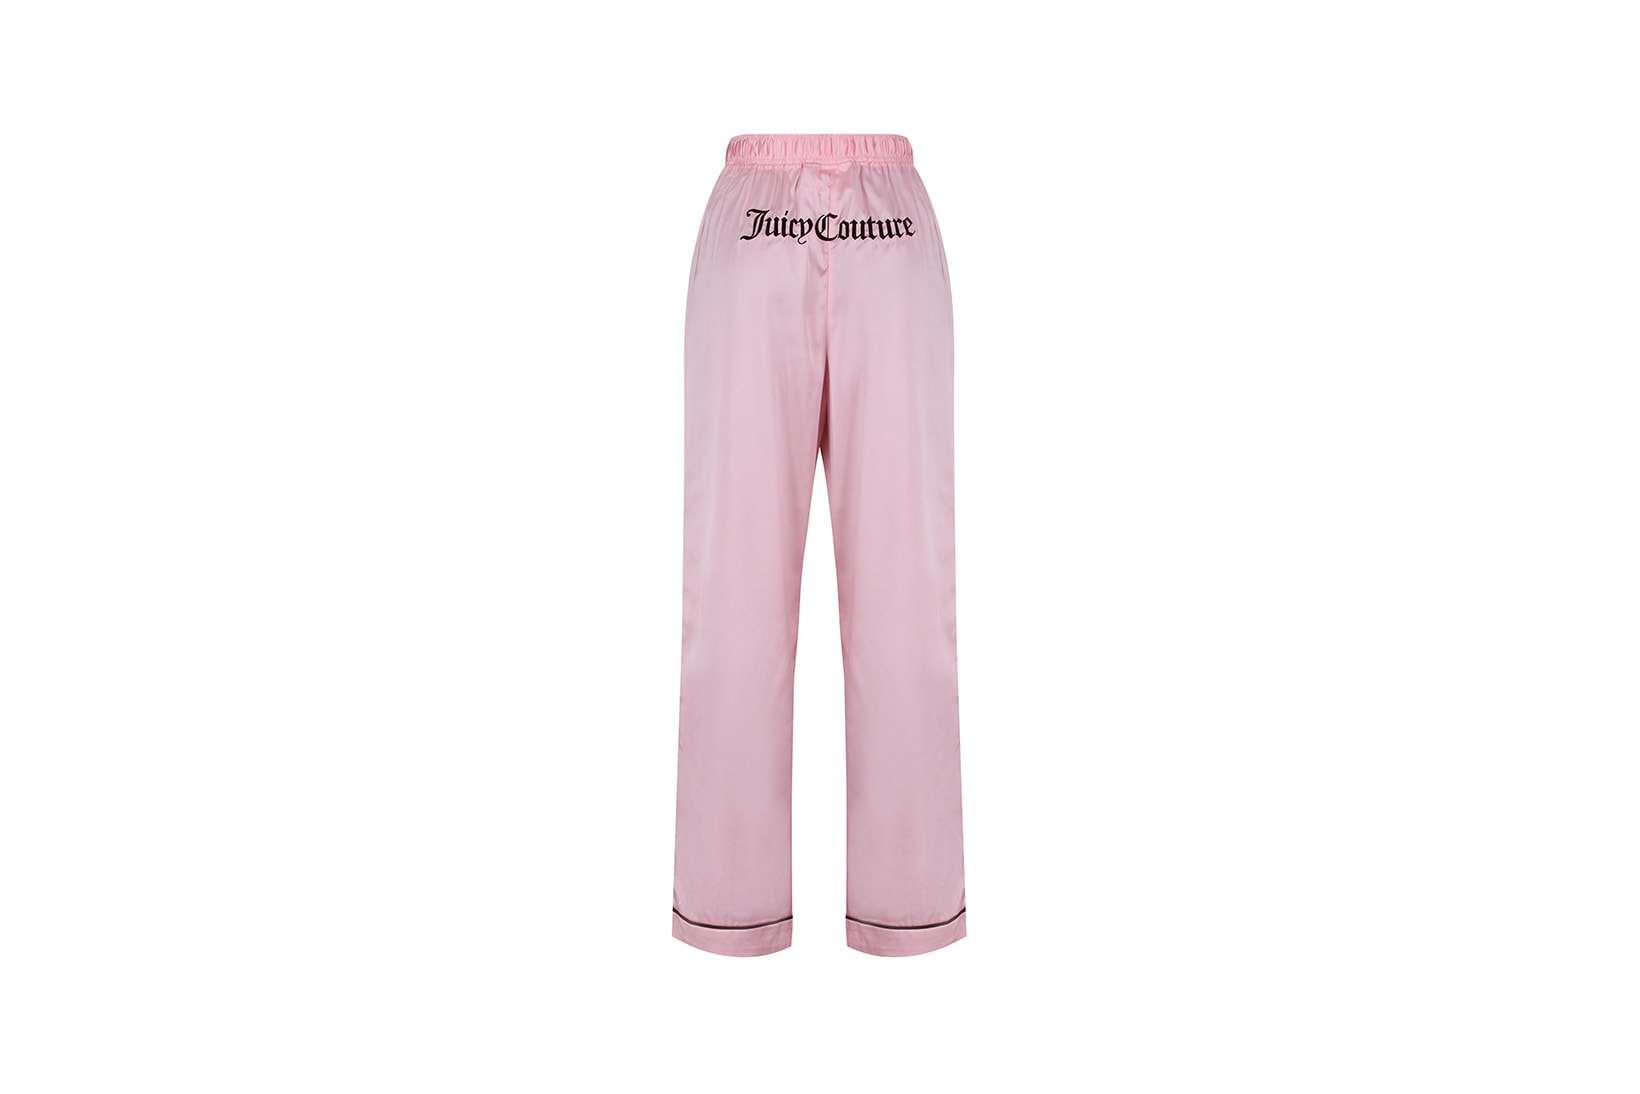 Juicy Couture Women's Pajama Sets for sale